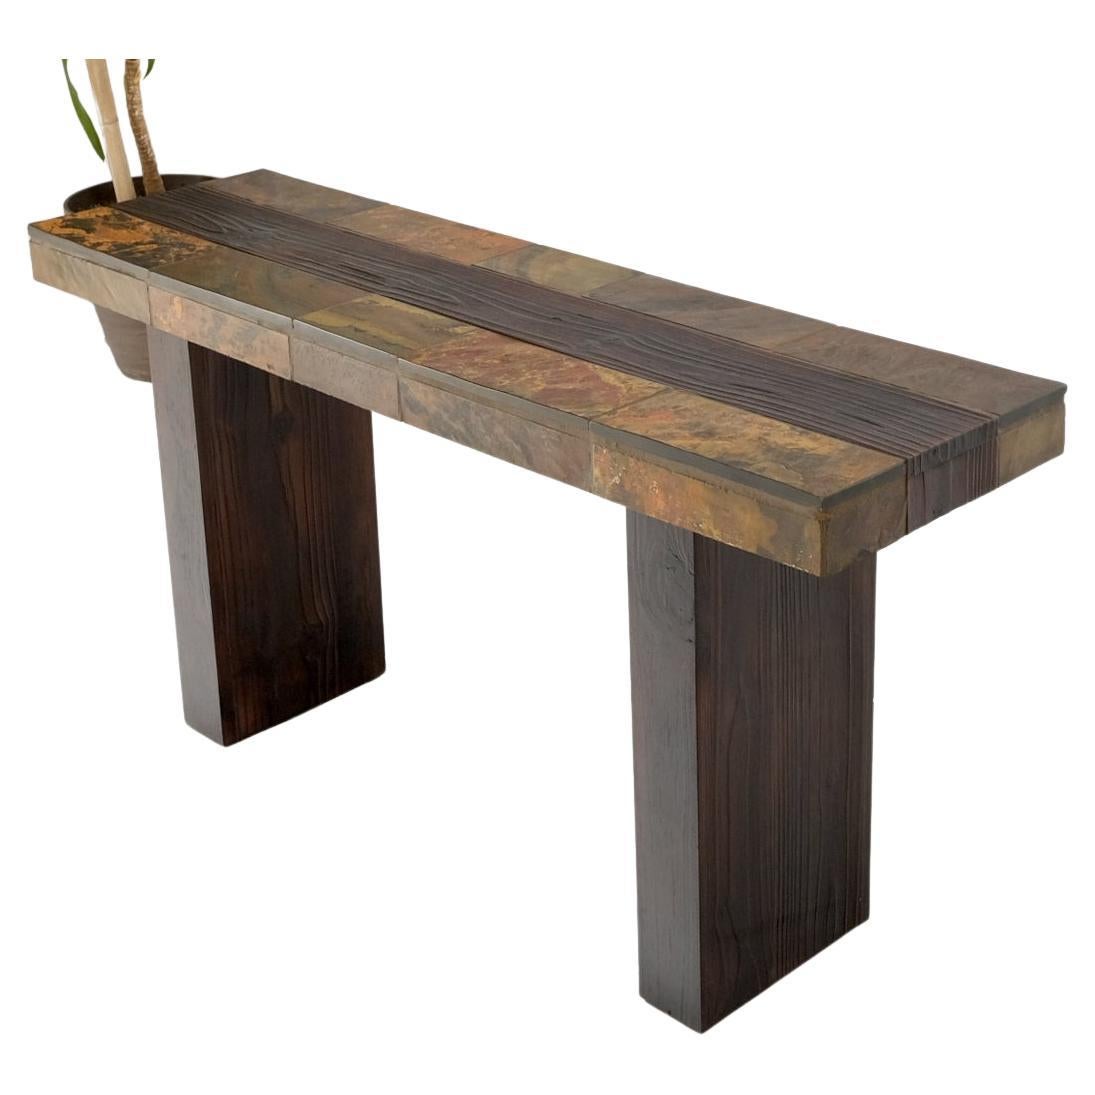 Exotic Rustic Wood & Stone Tile Mid-Century Modern Console Sofa Table For Sale